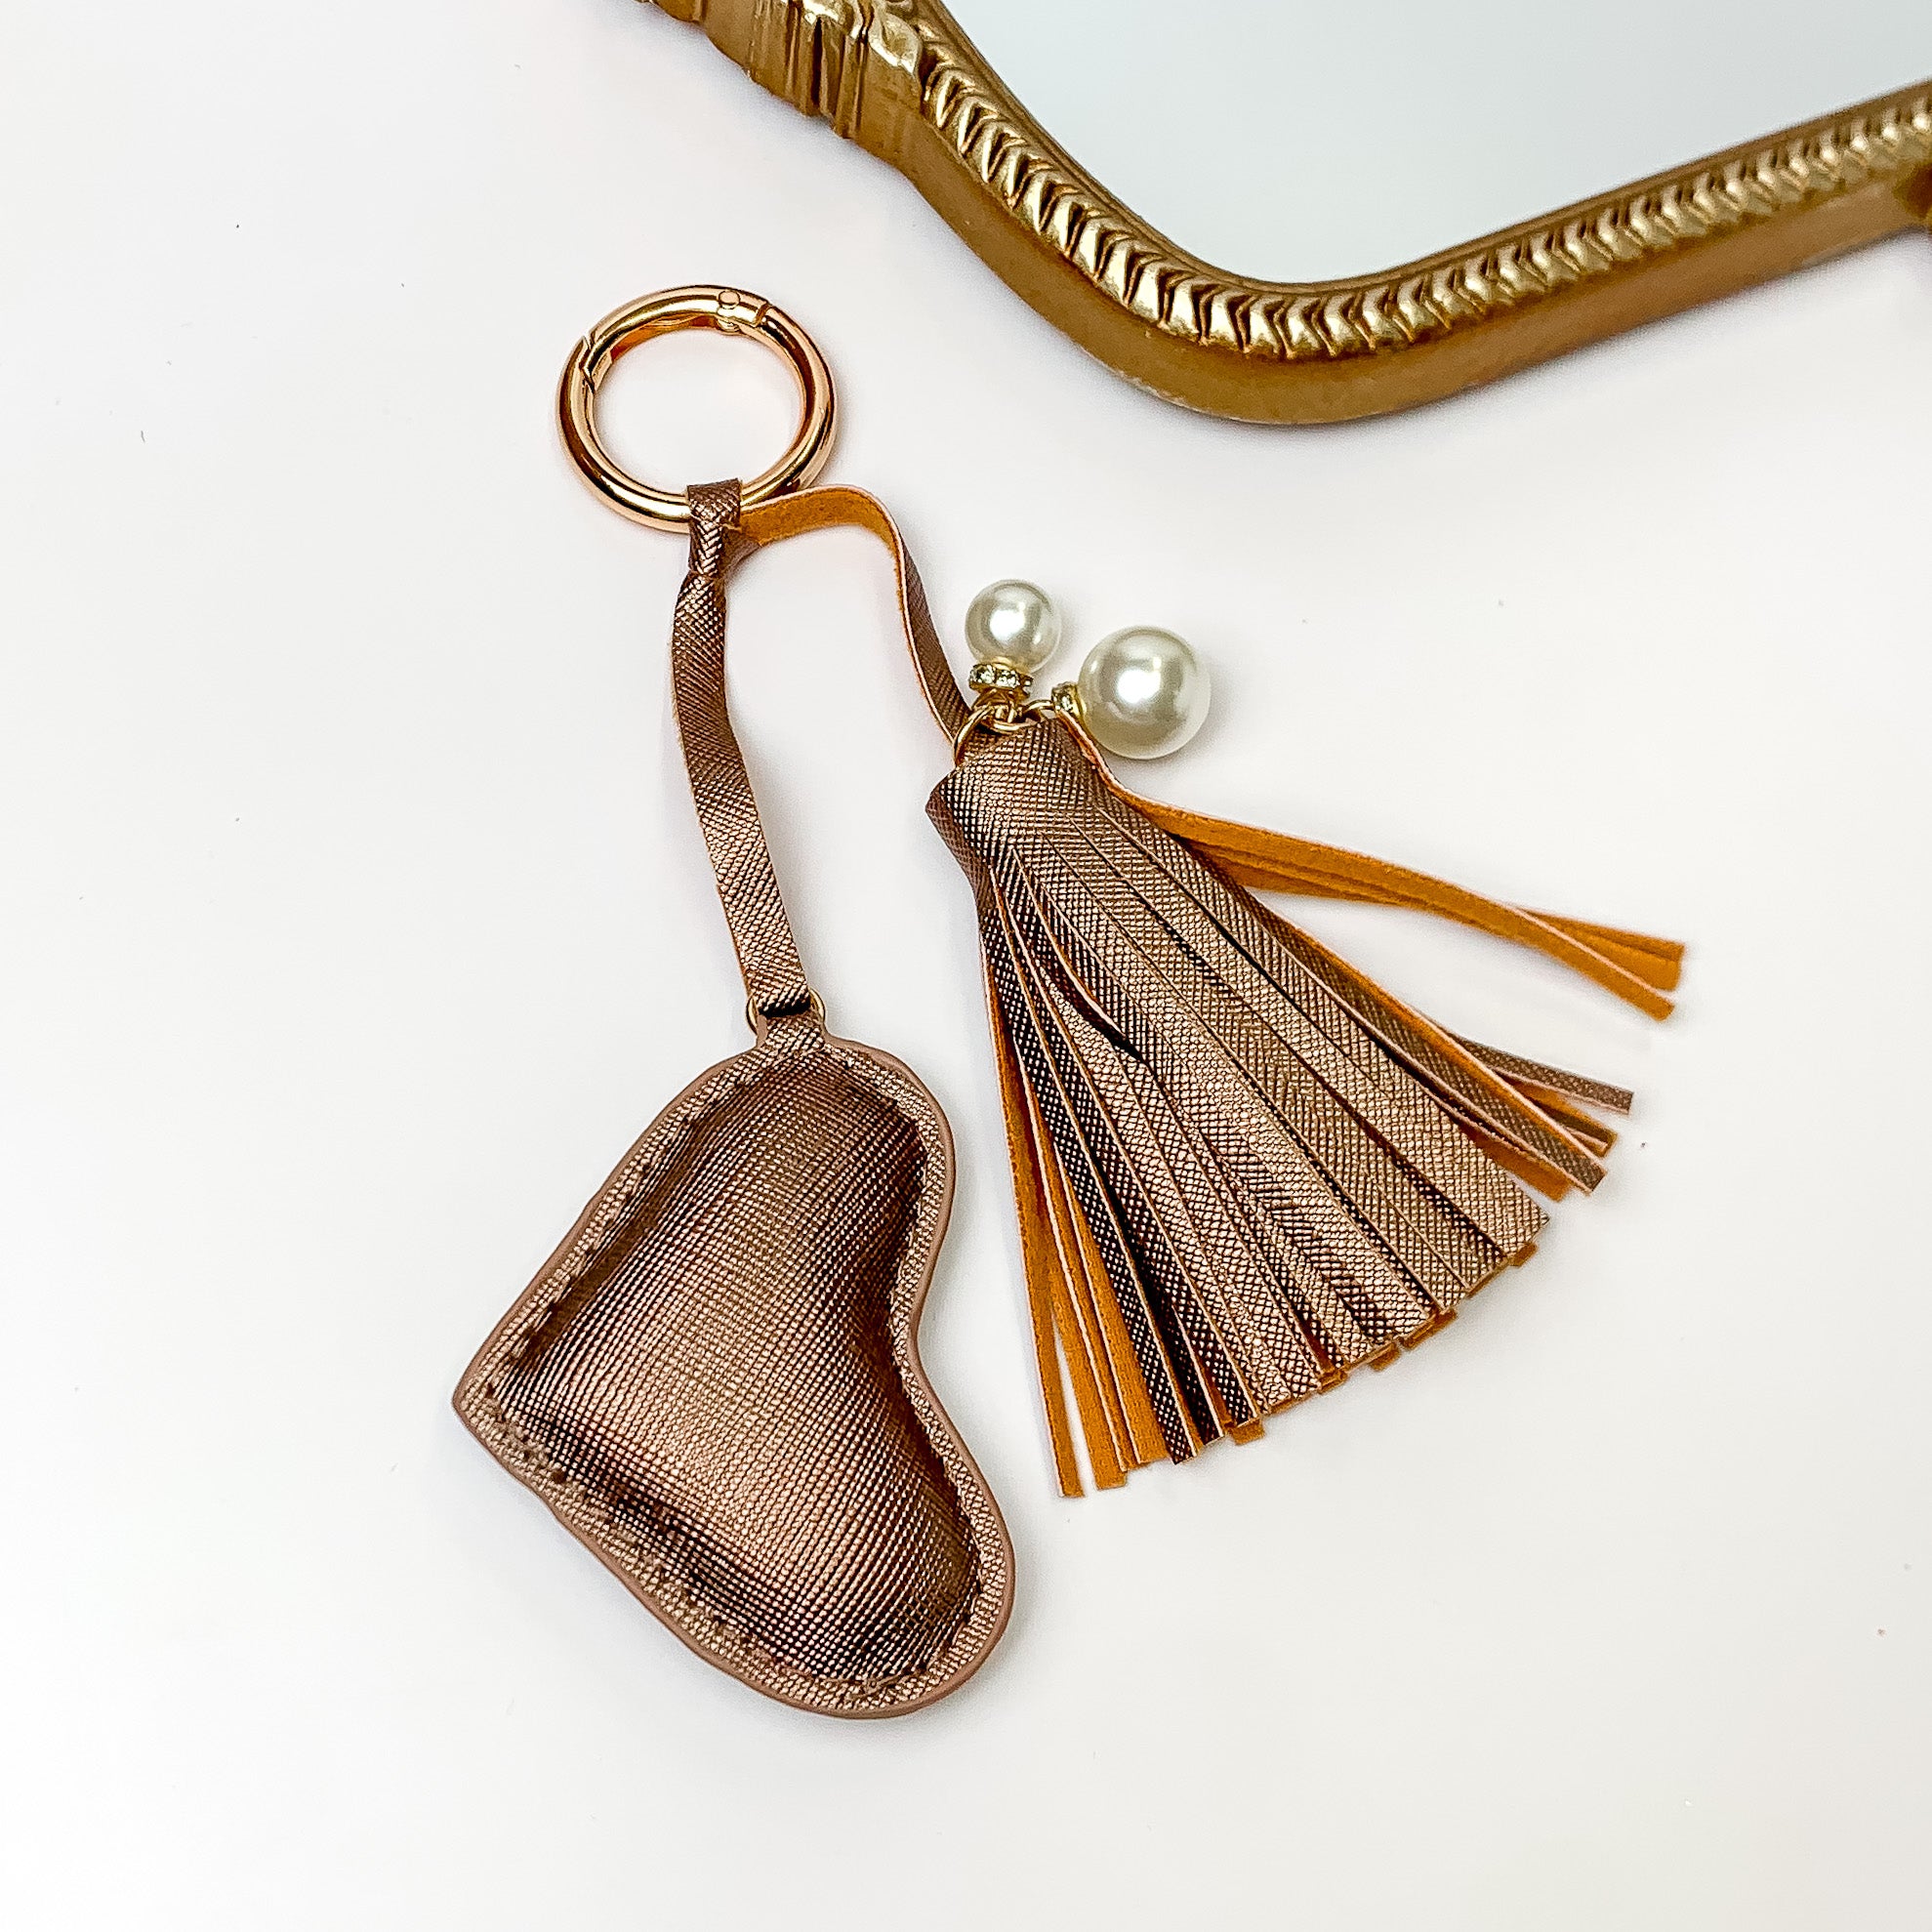 Gold key ring with a metallic mocha tassel and heart charm. The tassel includes two white, pearl beads. This keychain is pictured on a white background. 